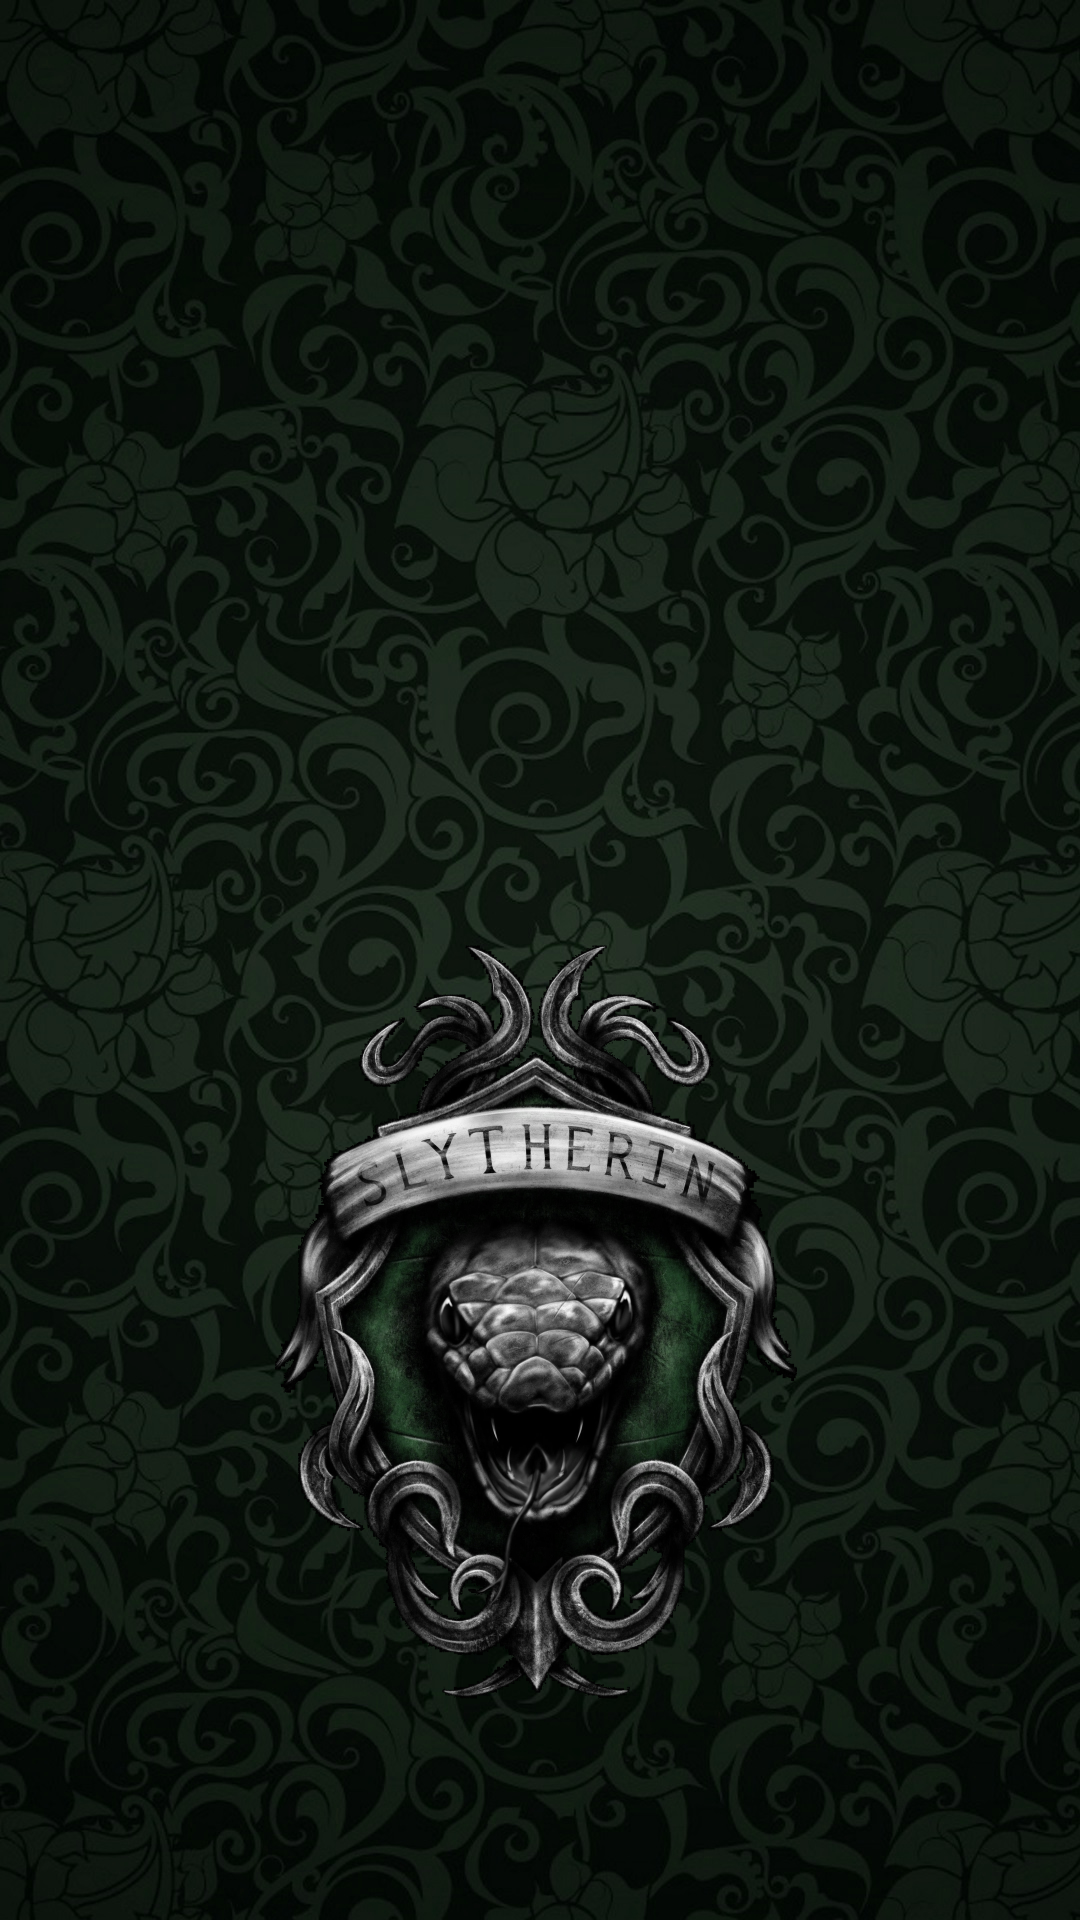 I Was Looking For A Classy Slytherin iPhone Wallpaper But Couldn